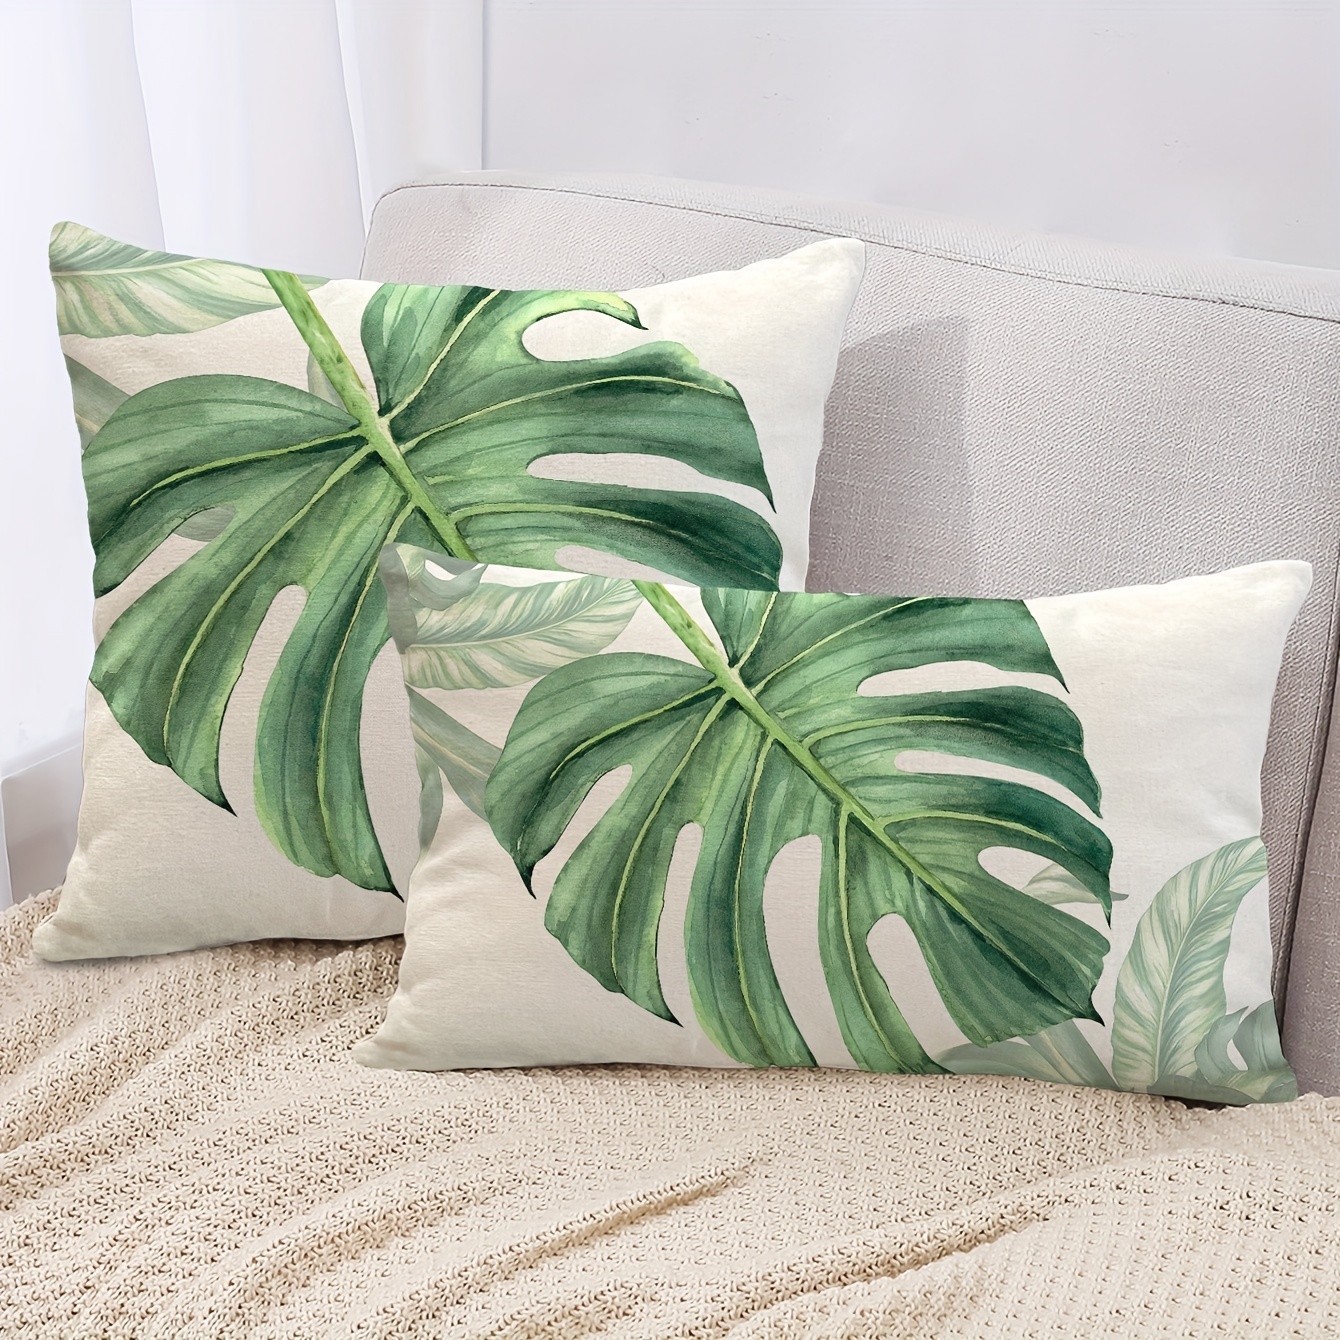 

1pc, Tropical Green Leaves Throw Pillow Cover, Palm Leaf Leaves Decorative Throw Pillow Cushion Cases Cover For Outdoor Sofa Patio Couch Car Decor, Without Pillow Insert